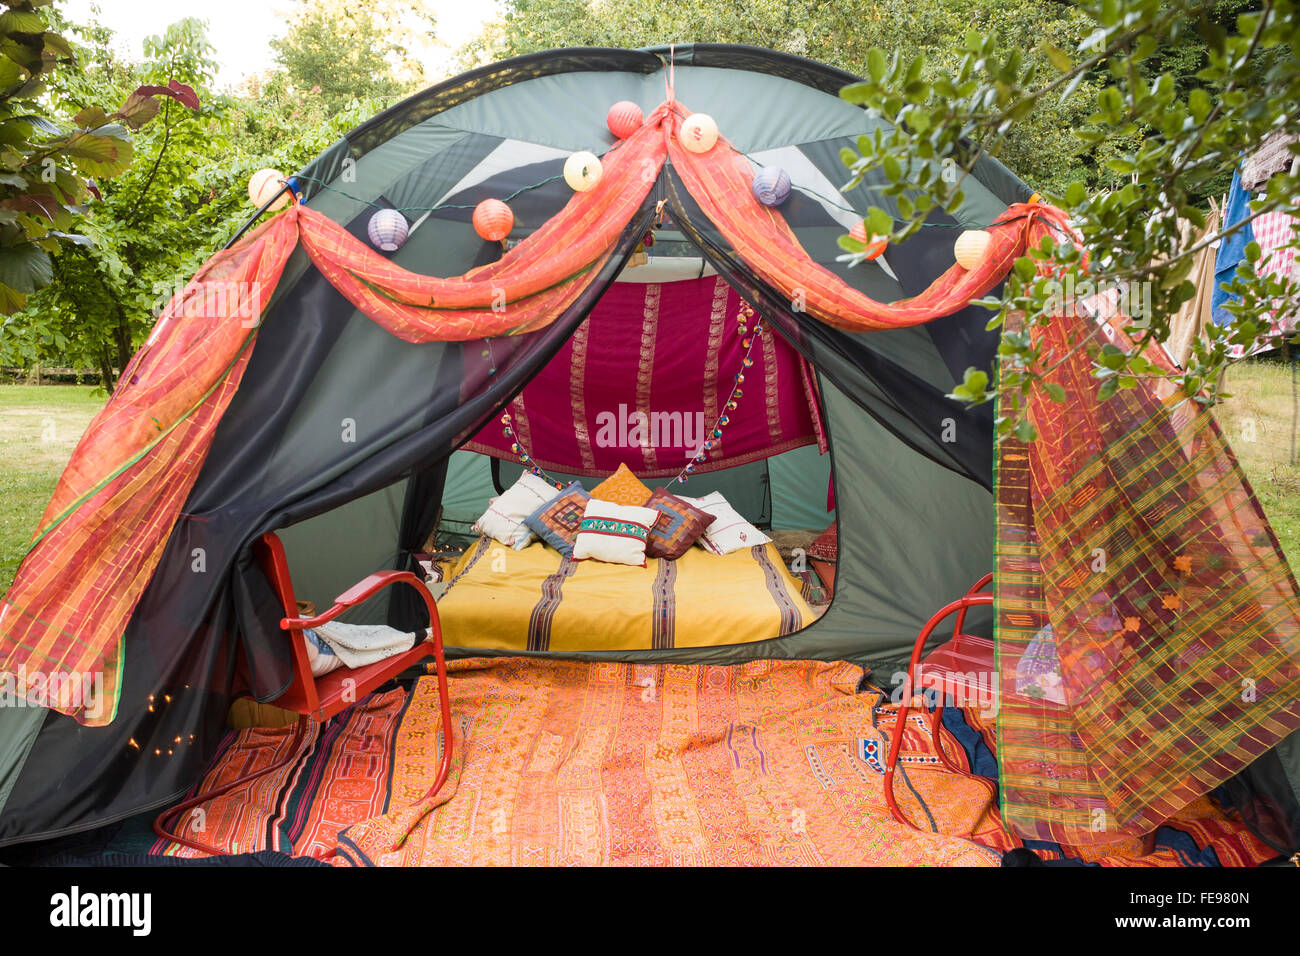 Glamping tent decorated with colorful pillows and blankets. Luxury camping unique summer vacations adventure travel experiences. Stock Photo